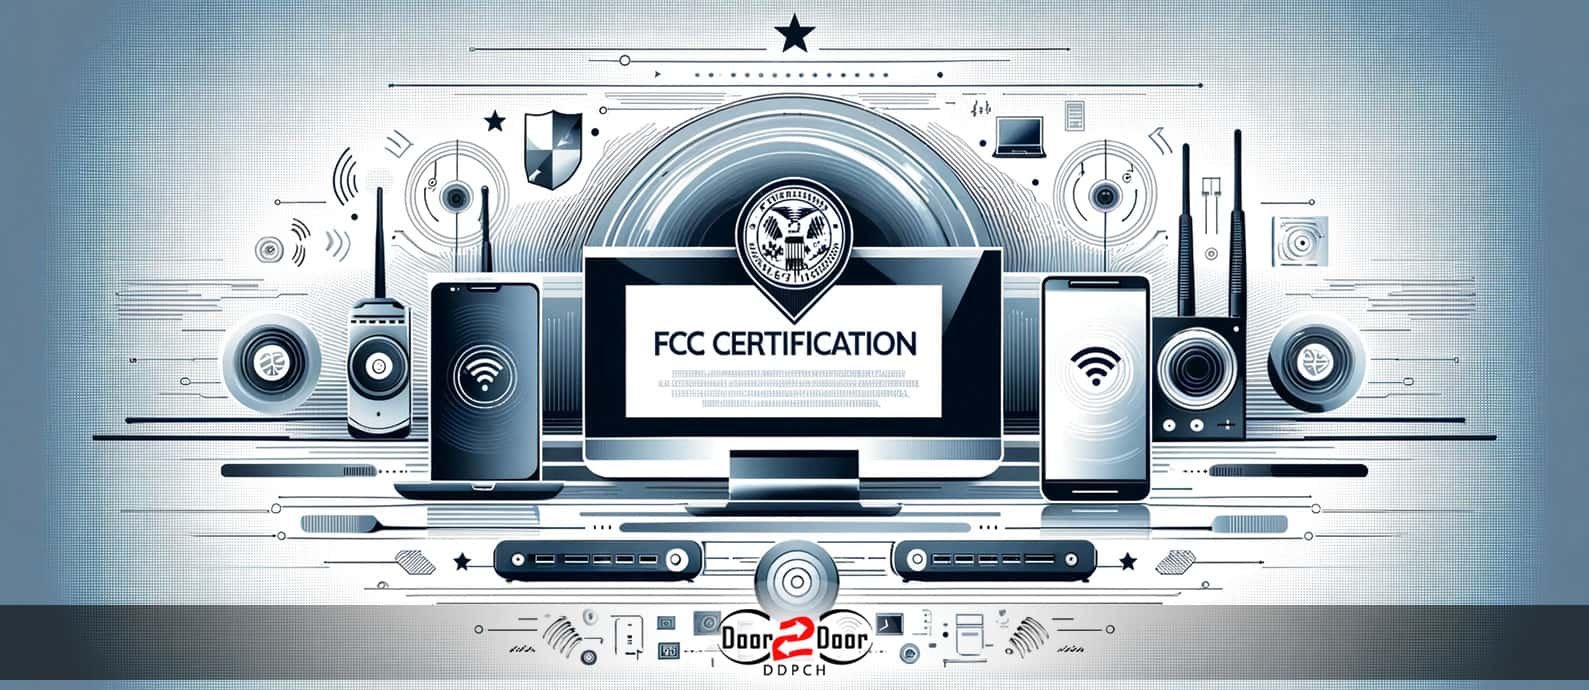 Infographic displaying 'FCC Certification' with images of electronic devices like laptops, smartphones, and Wi-Fi routers, set against a modern, circuit-patterned background.